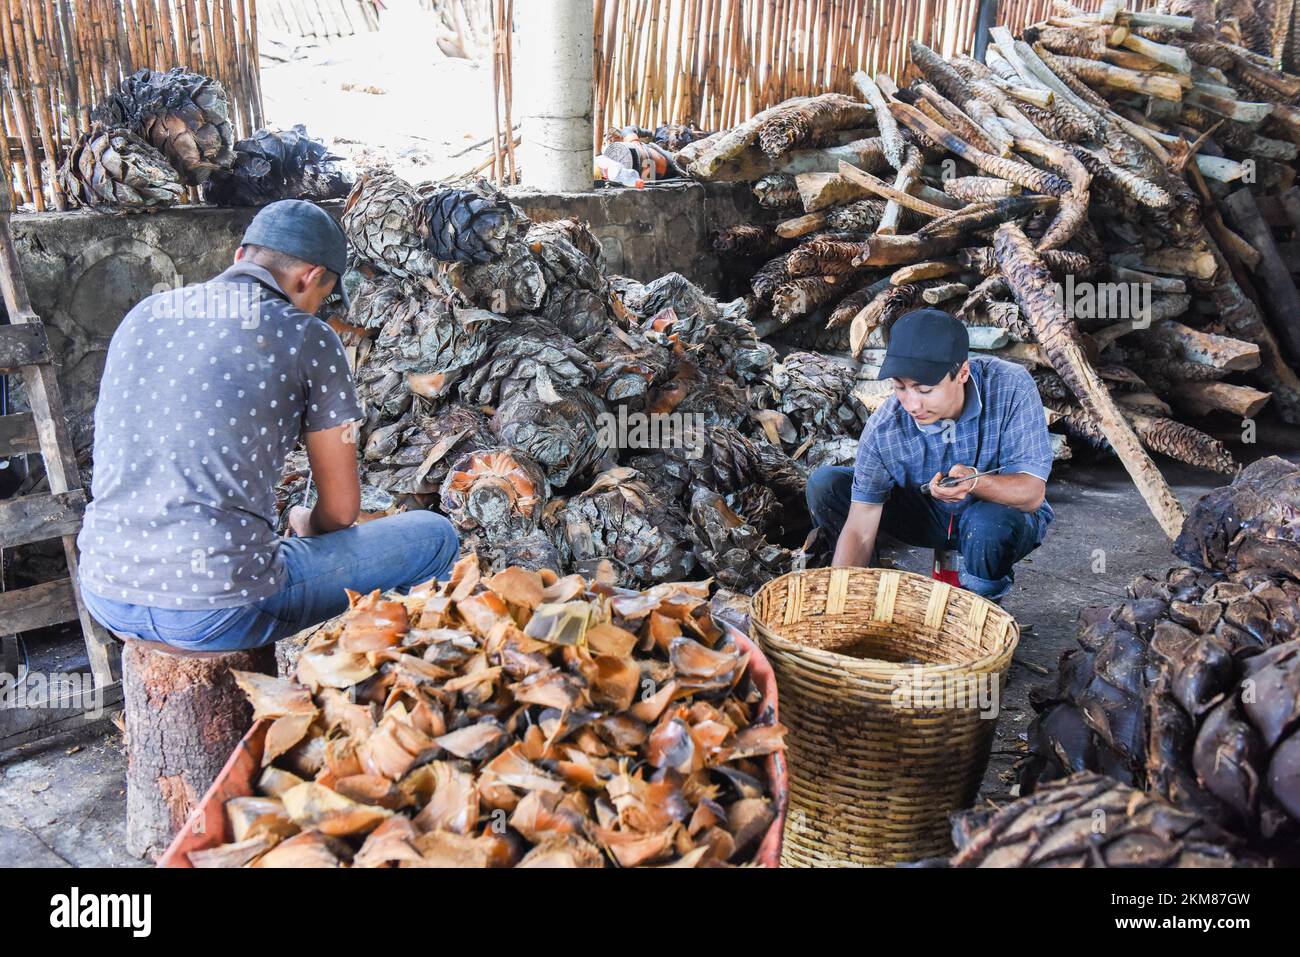 Workers chopping roasted agave hearts in an artisanal mezcal factory, Oaxaca state, Mexico Stock Photo